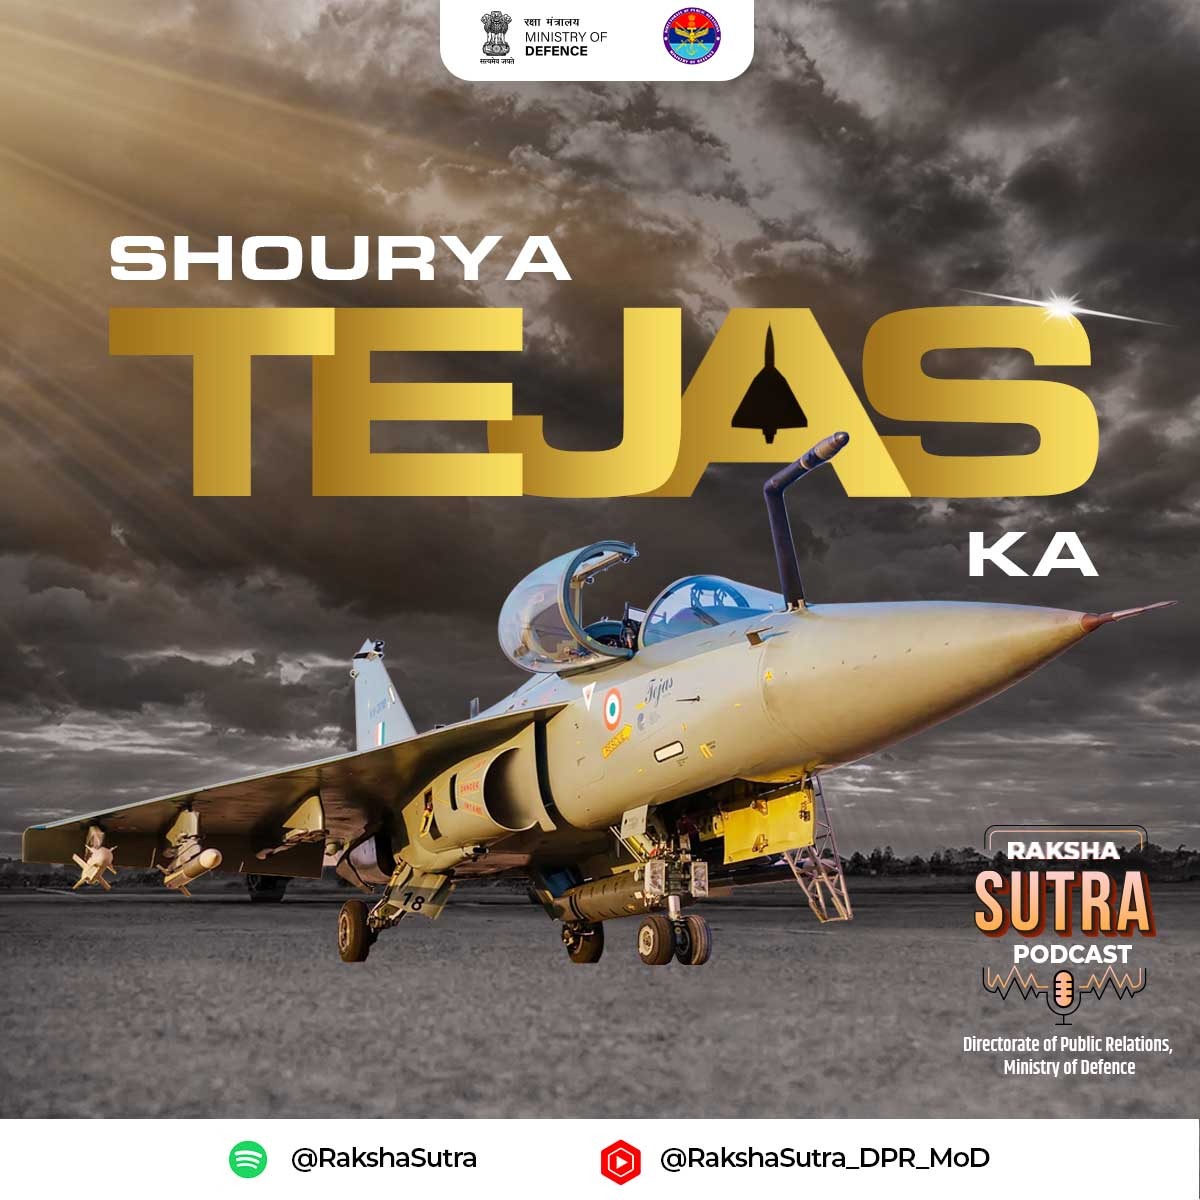 In today's episode of Podcast #RakshaSutra, 'Shourya #Tejas Ka', know about the #LightCombatAircraft & its latest version from those who make it & who fly it @HALHQBLR. Tune in now 👇🏻 shorturl.at/HIU02 shorturl.at/fgGRW